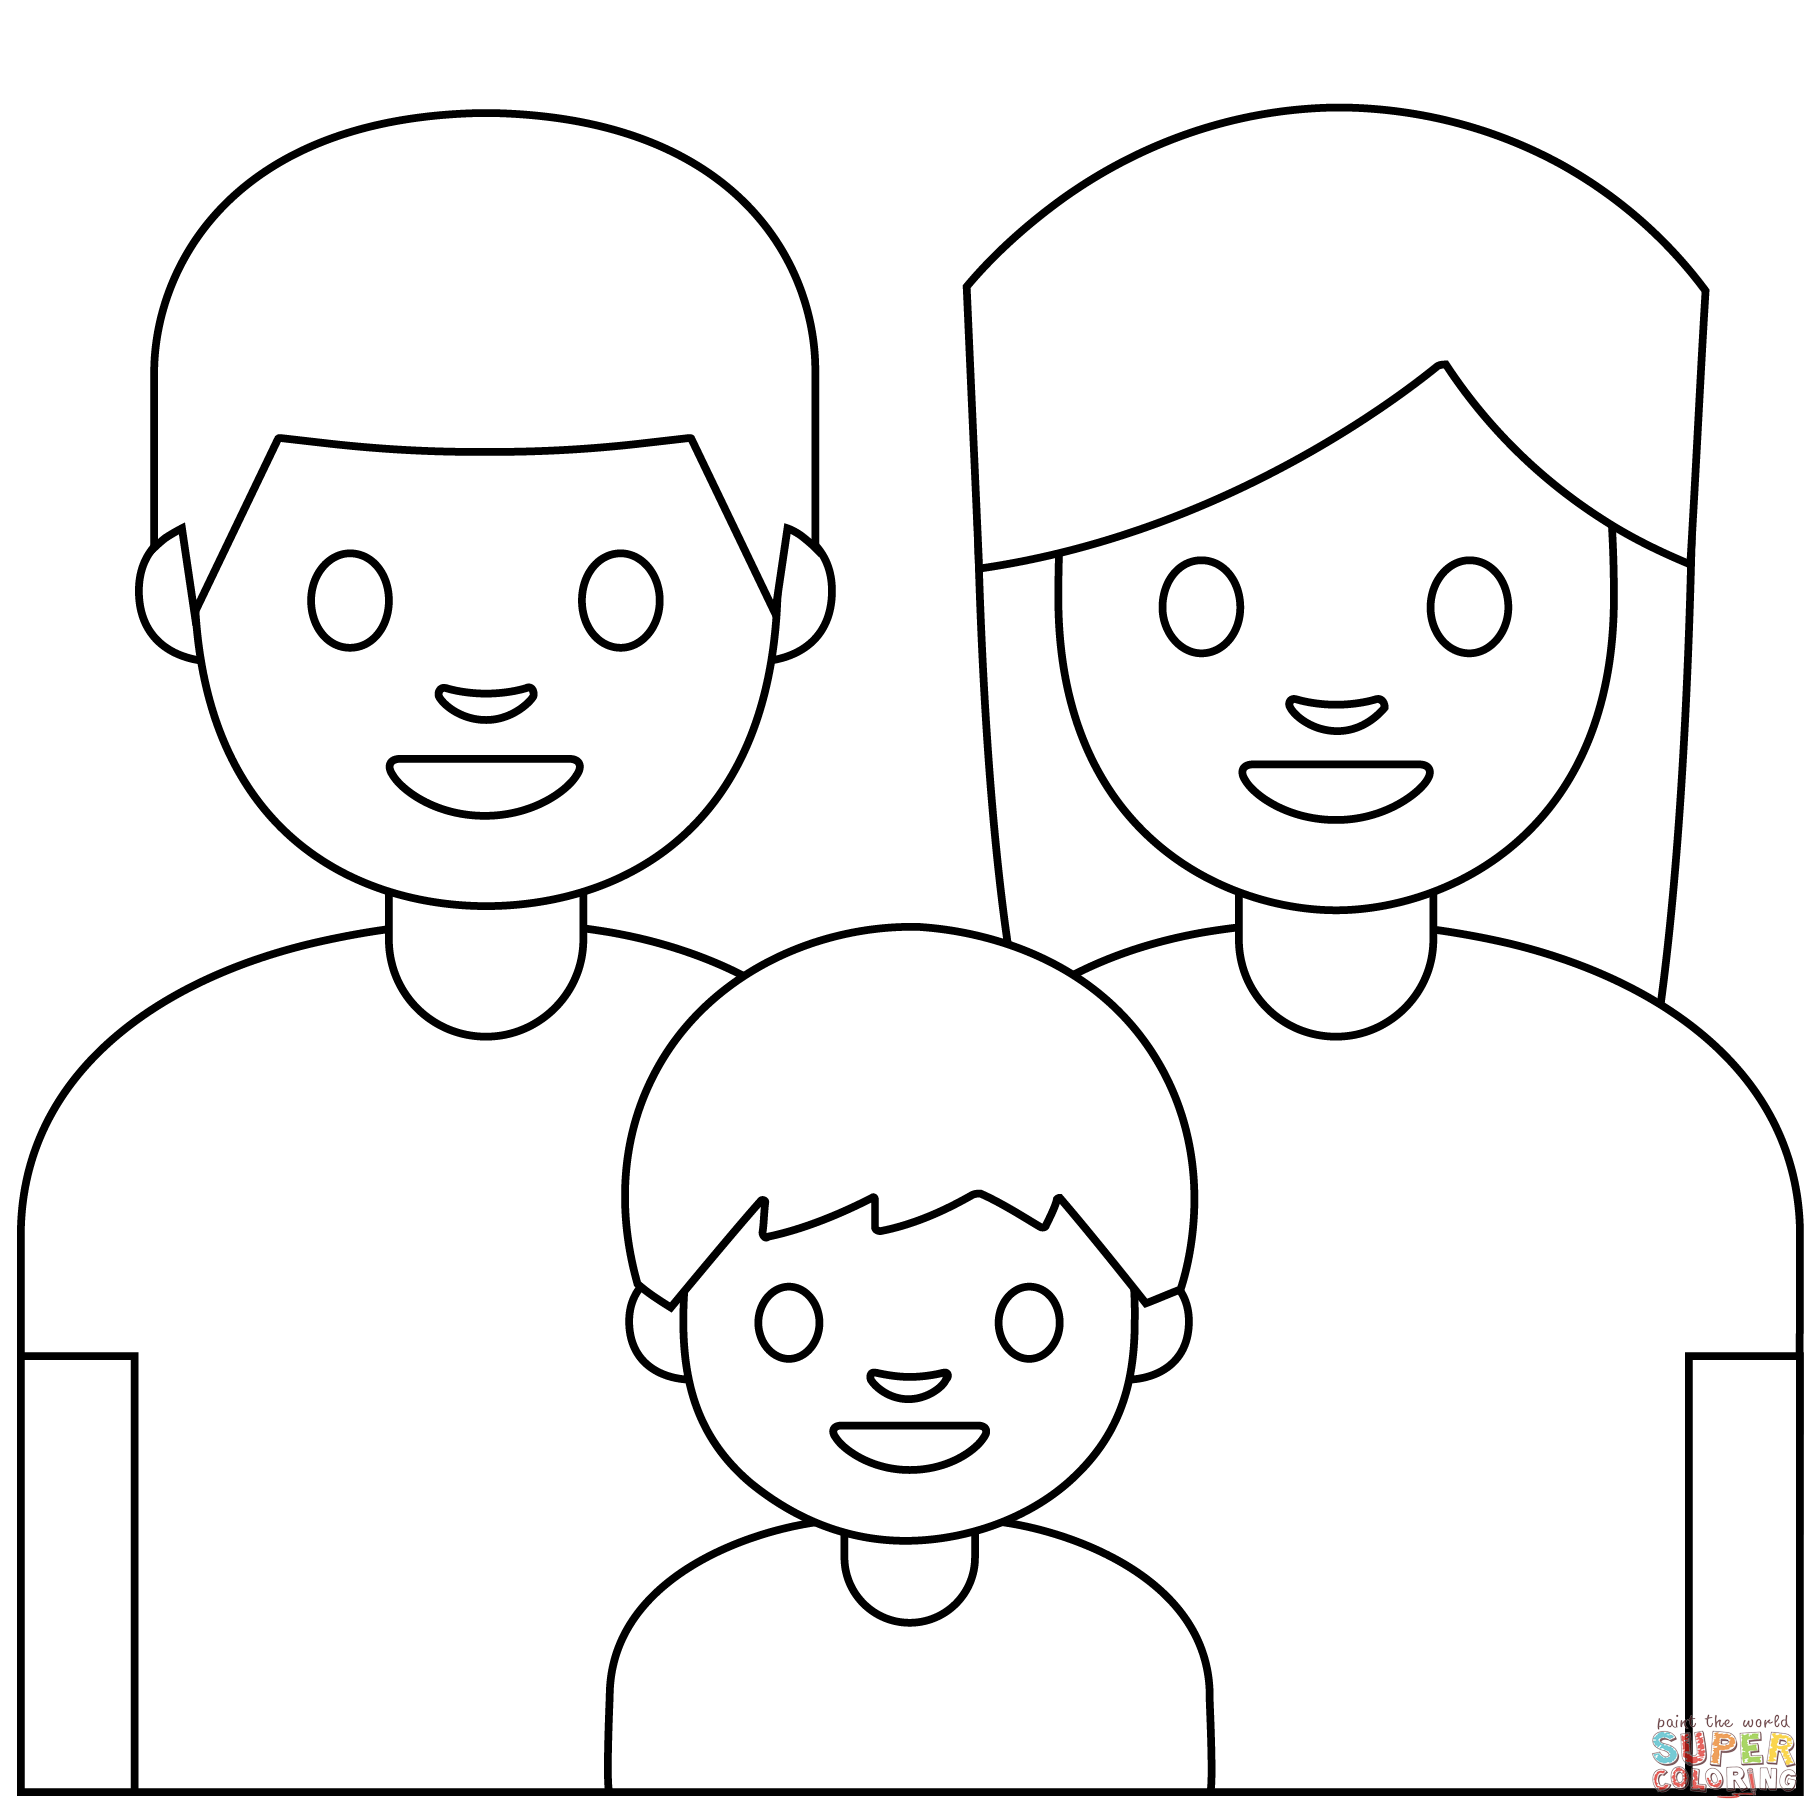 Family Emoji coloring page | Free Printable Coloring Pages